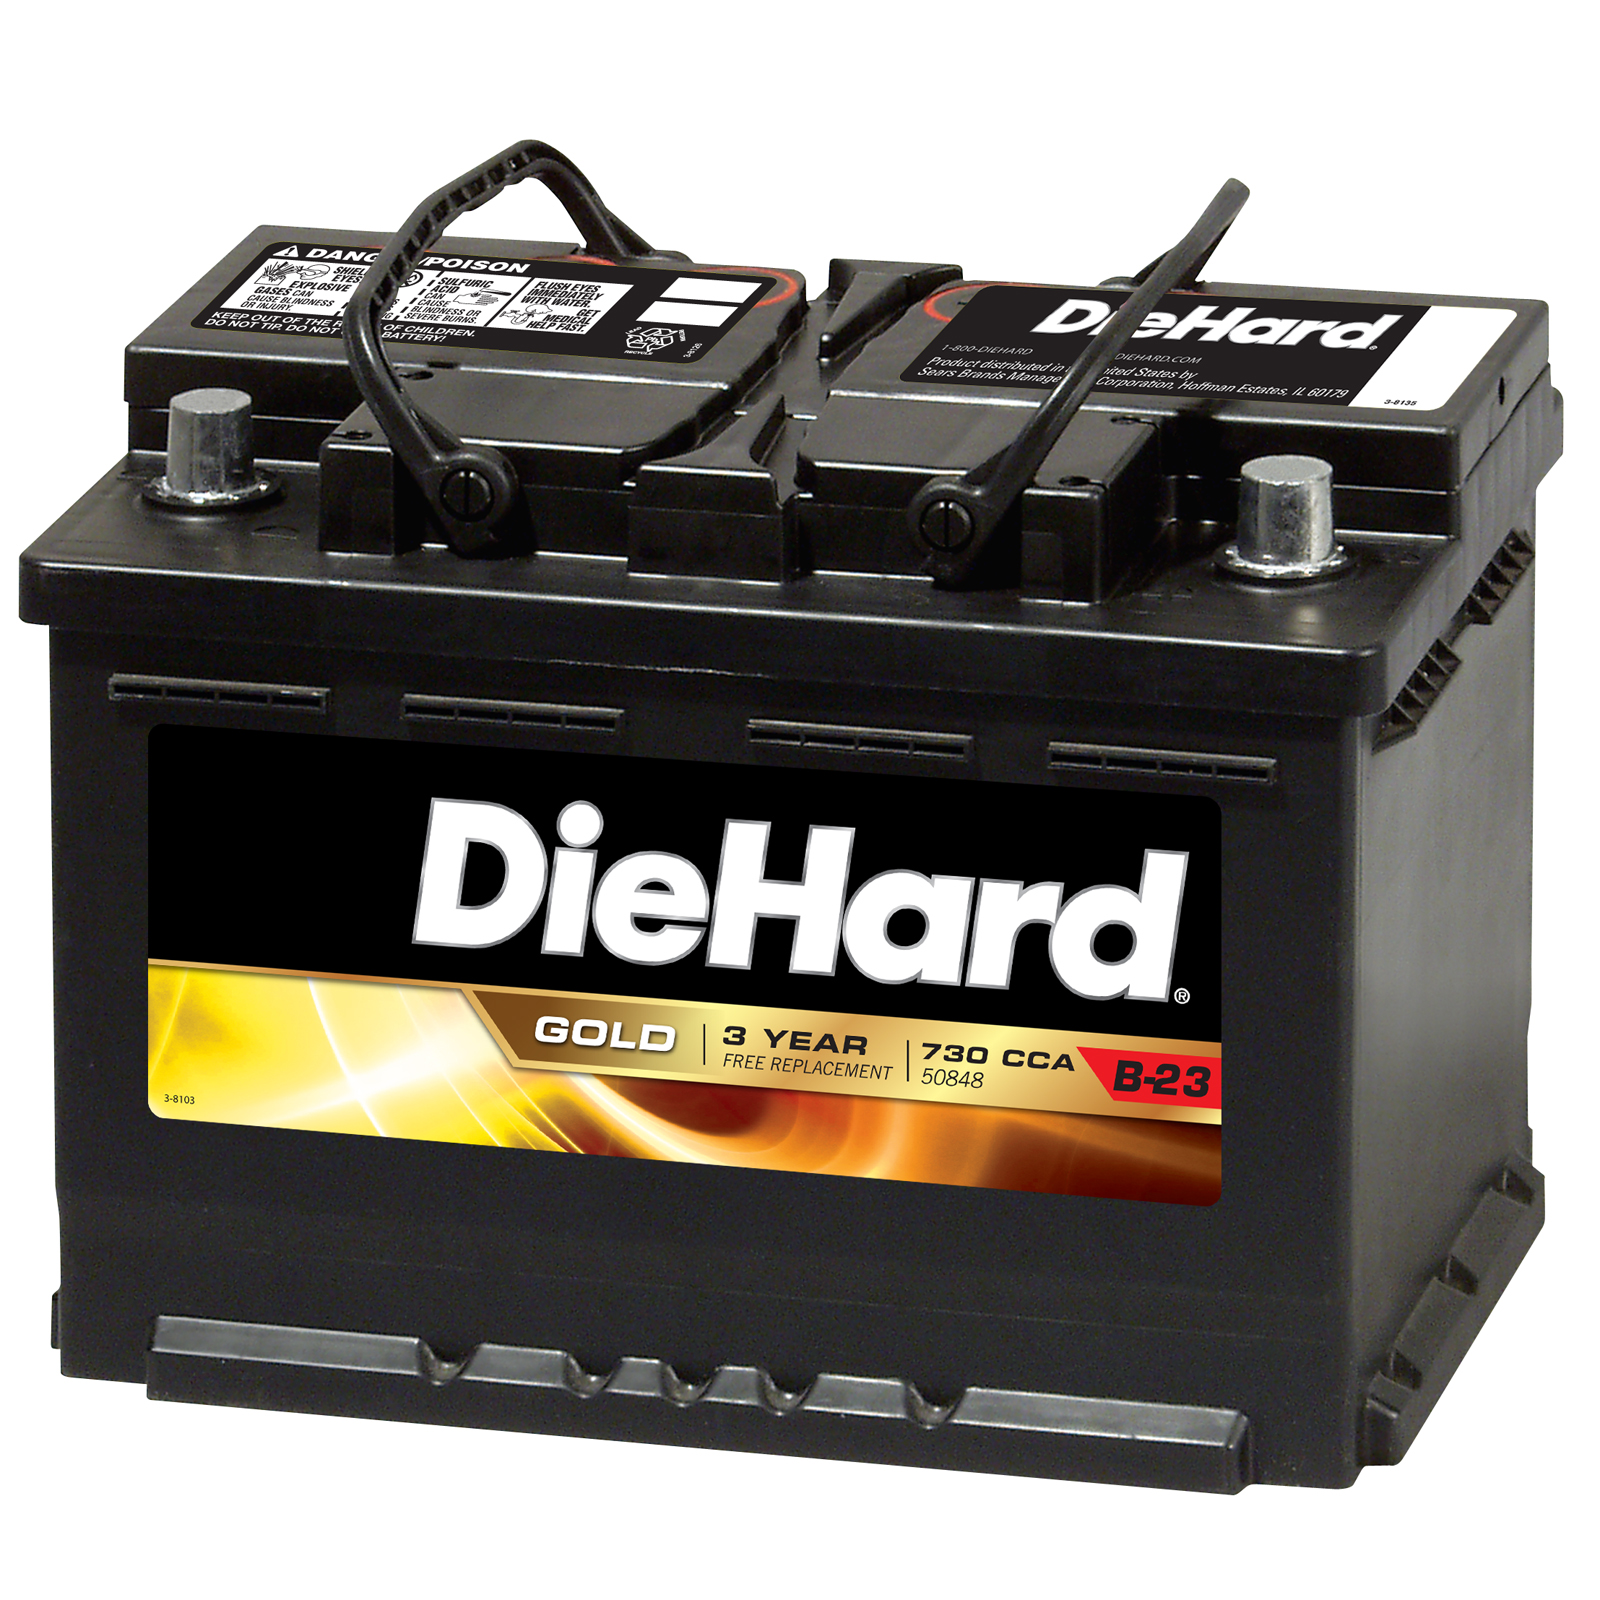 DieHard Gold Automotive Battery - Group Size EP-48 (Price with Exchange)